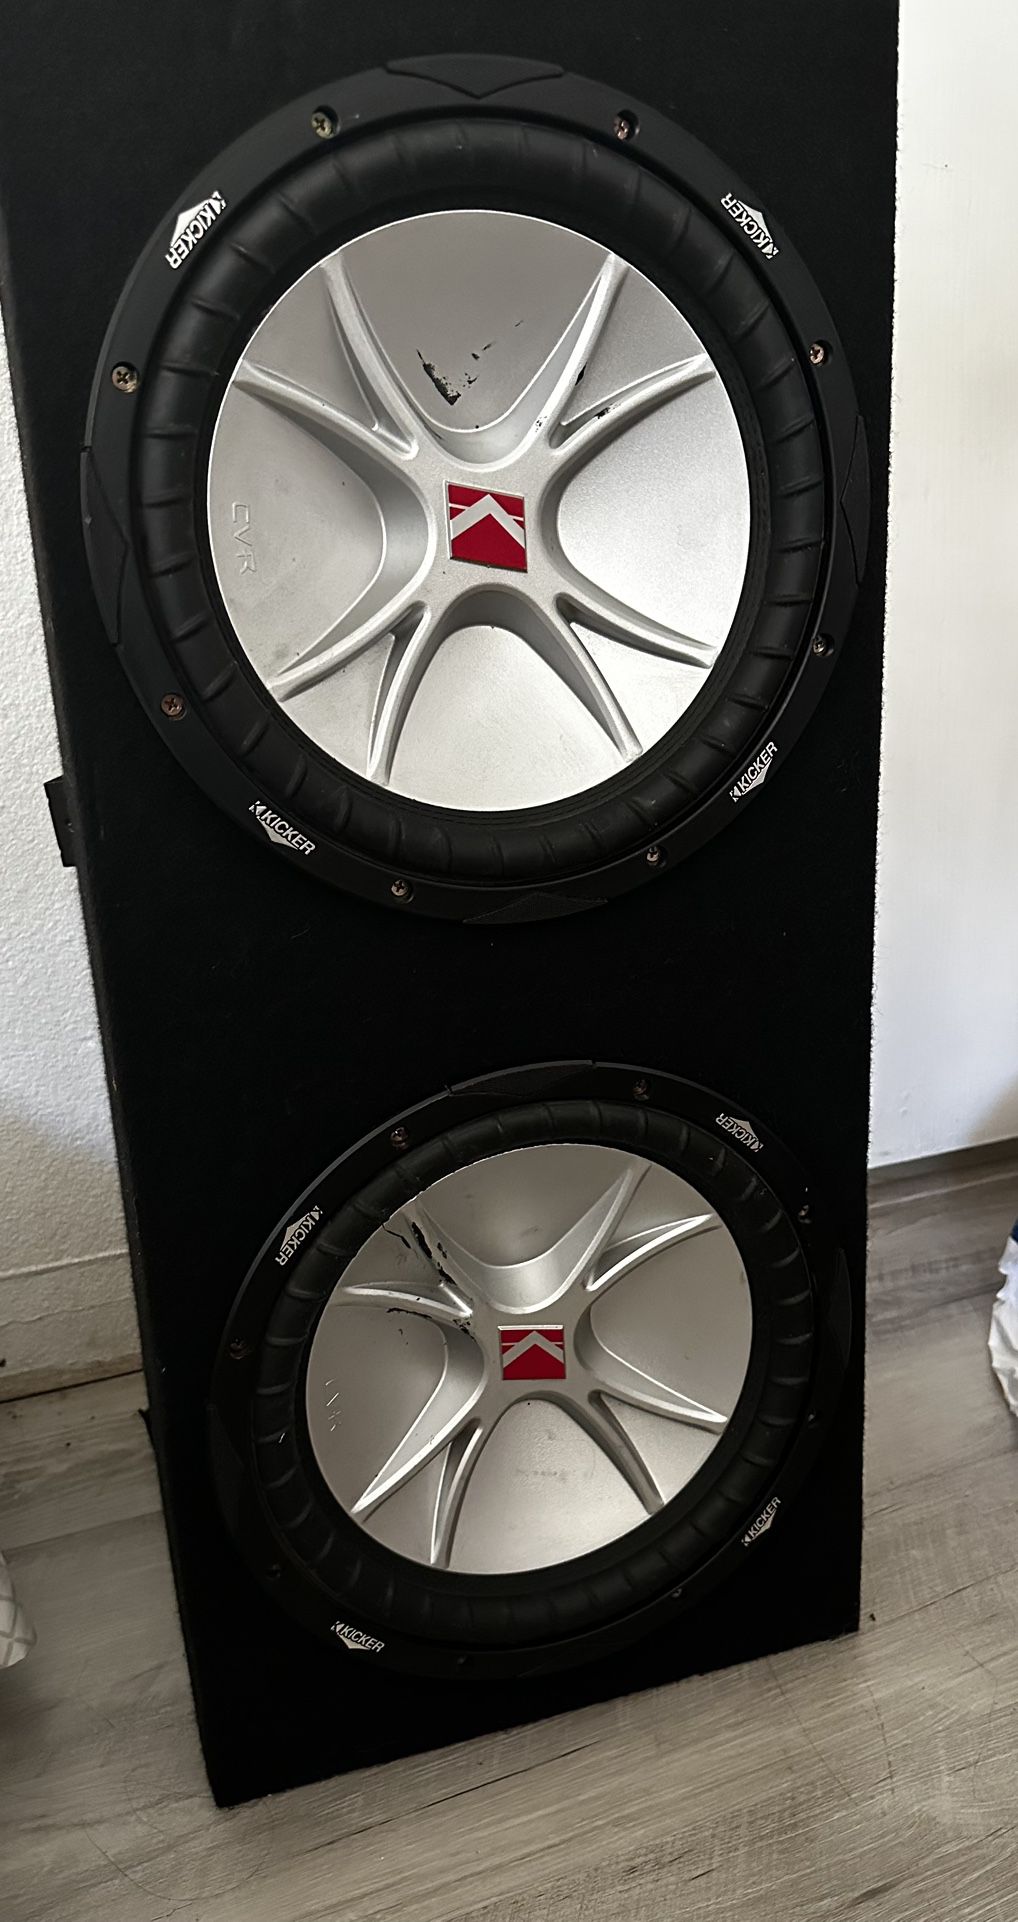 two 12” subwoofer